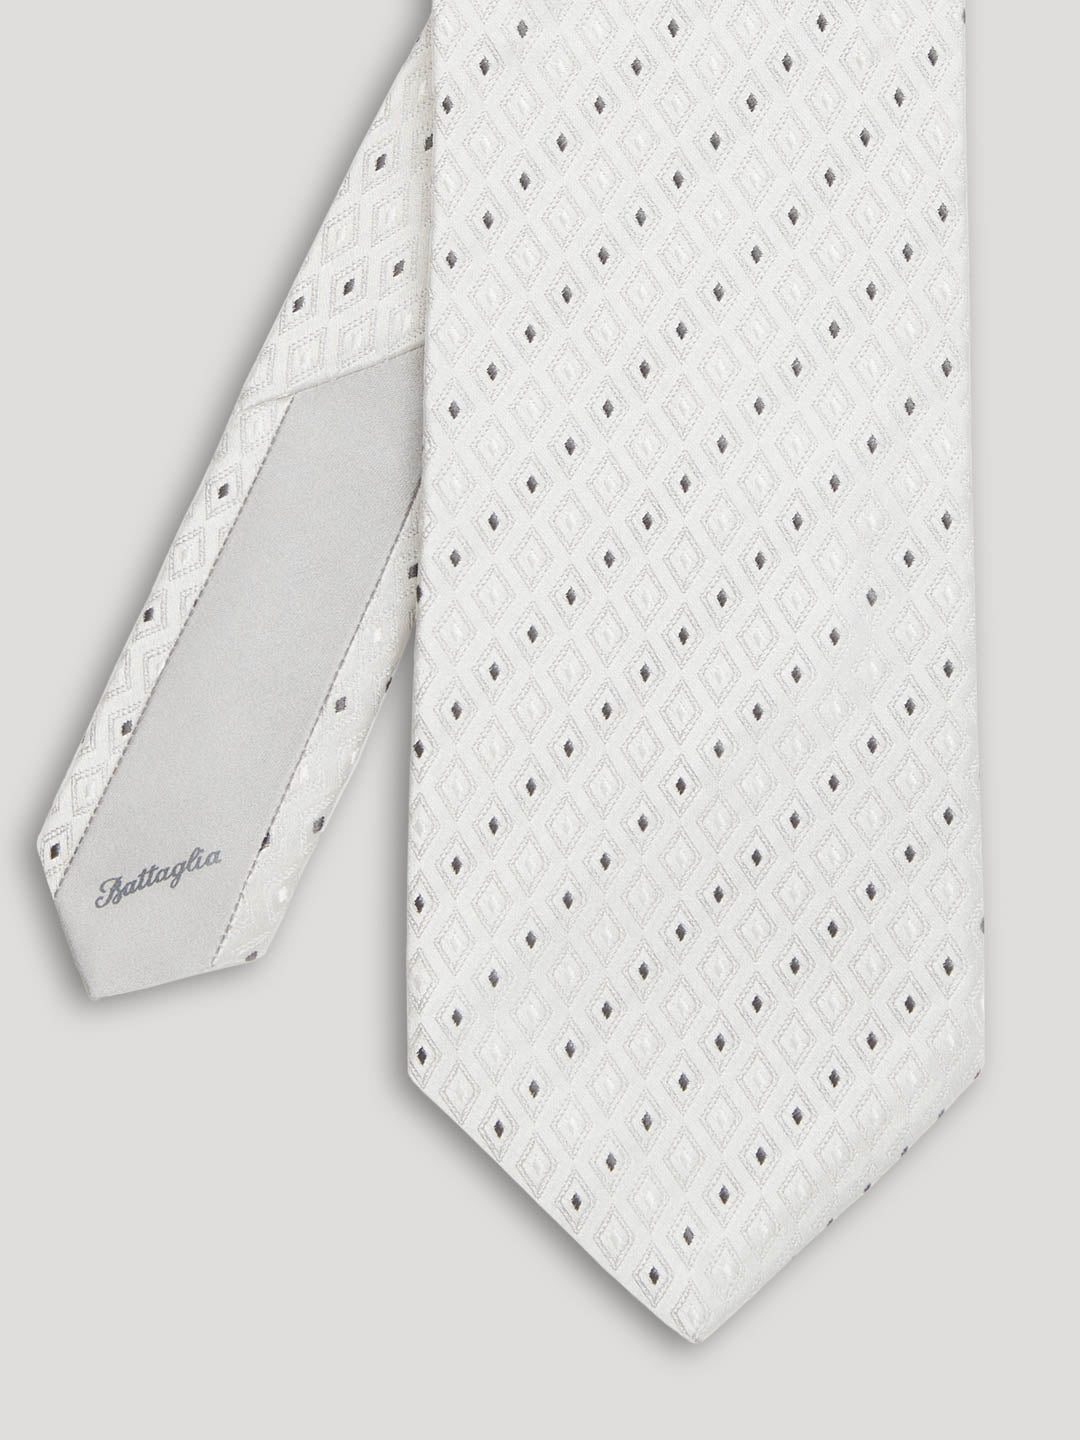 Silver tie with pinpoint geometric design. 